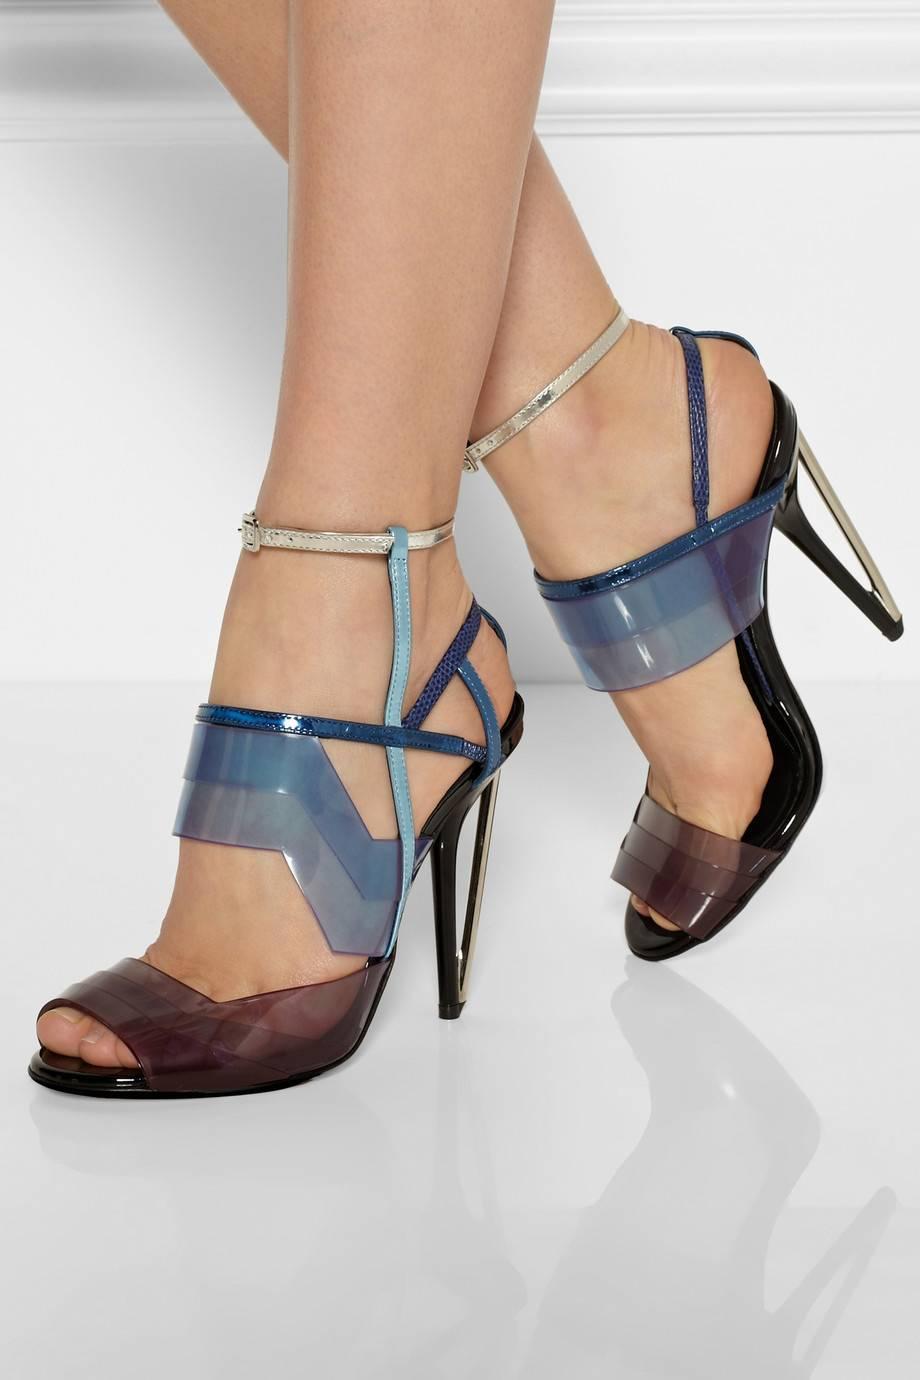 CURATOR'S NOTES

Fendi New Runway Blue Purple Silver Cut Out Sandals Heels in Box  

Size IT 36
PVC 
Ankle strap closure
Leather lining
Leather sole
Made in Italy
Heel height 4.5" 
Includes original Fendi box